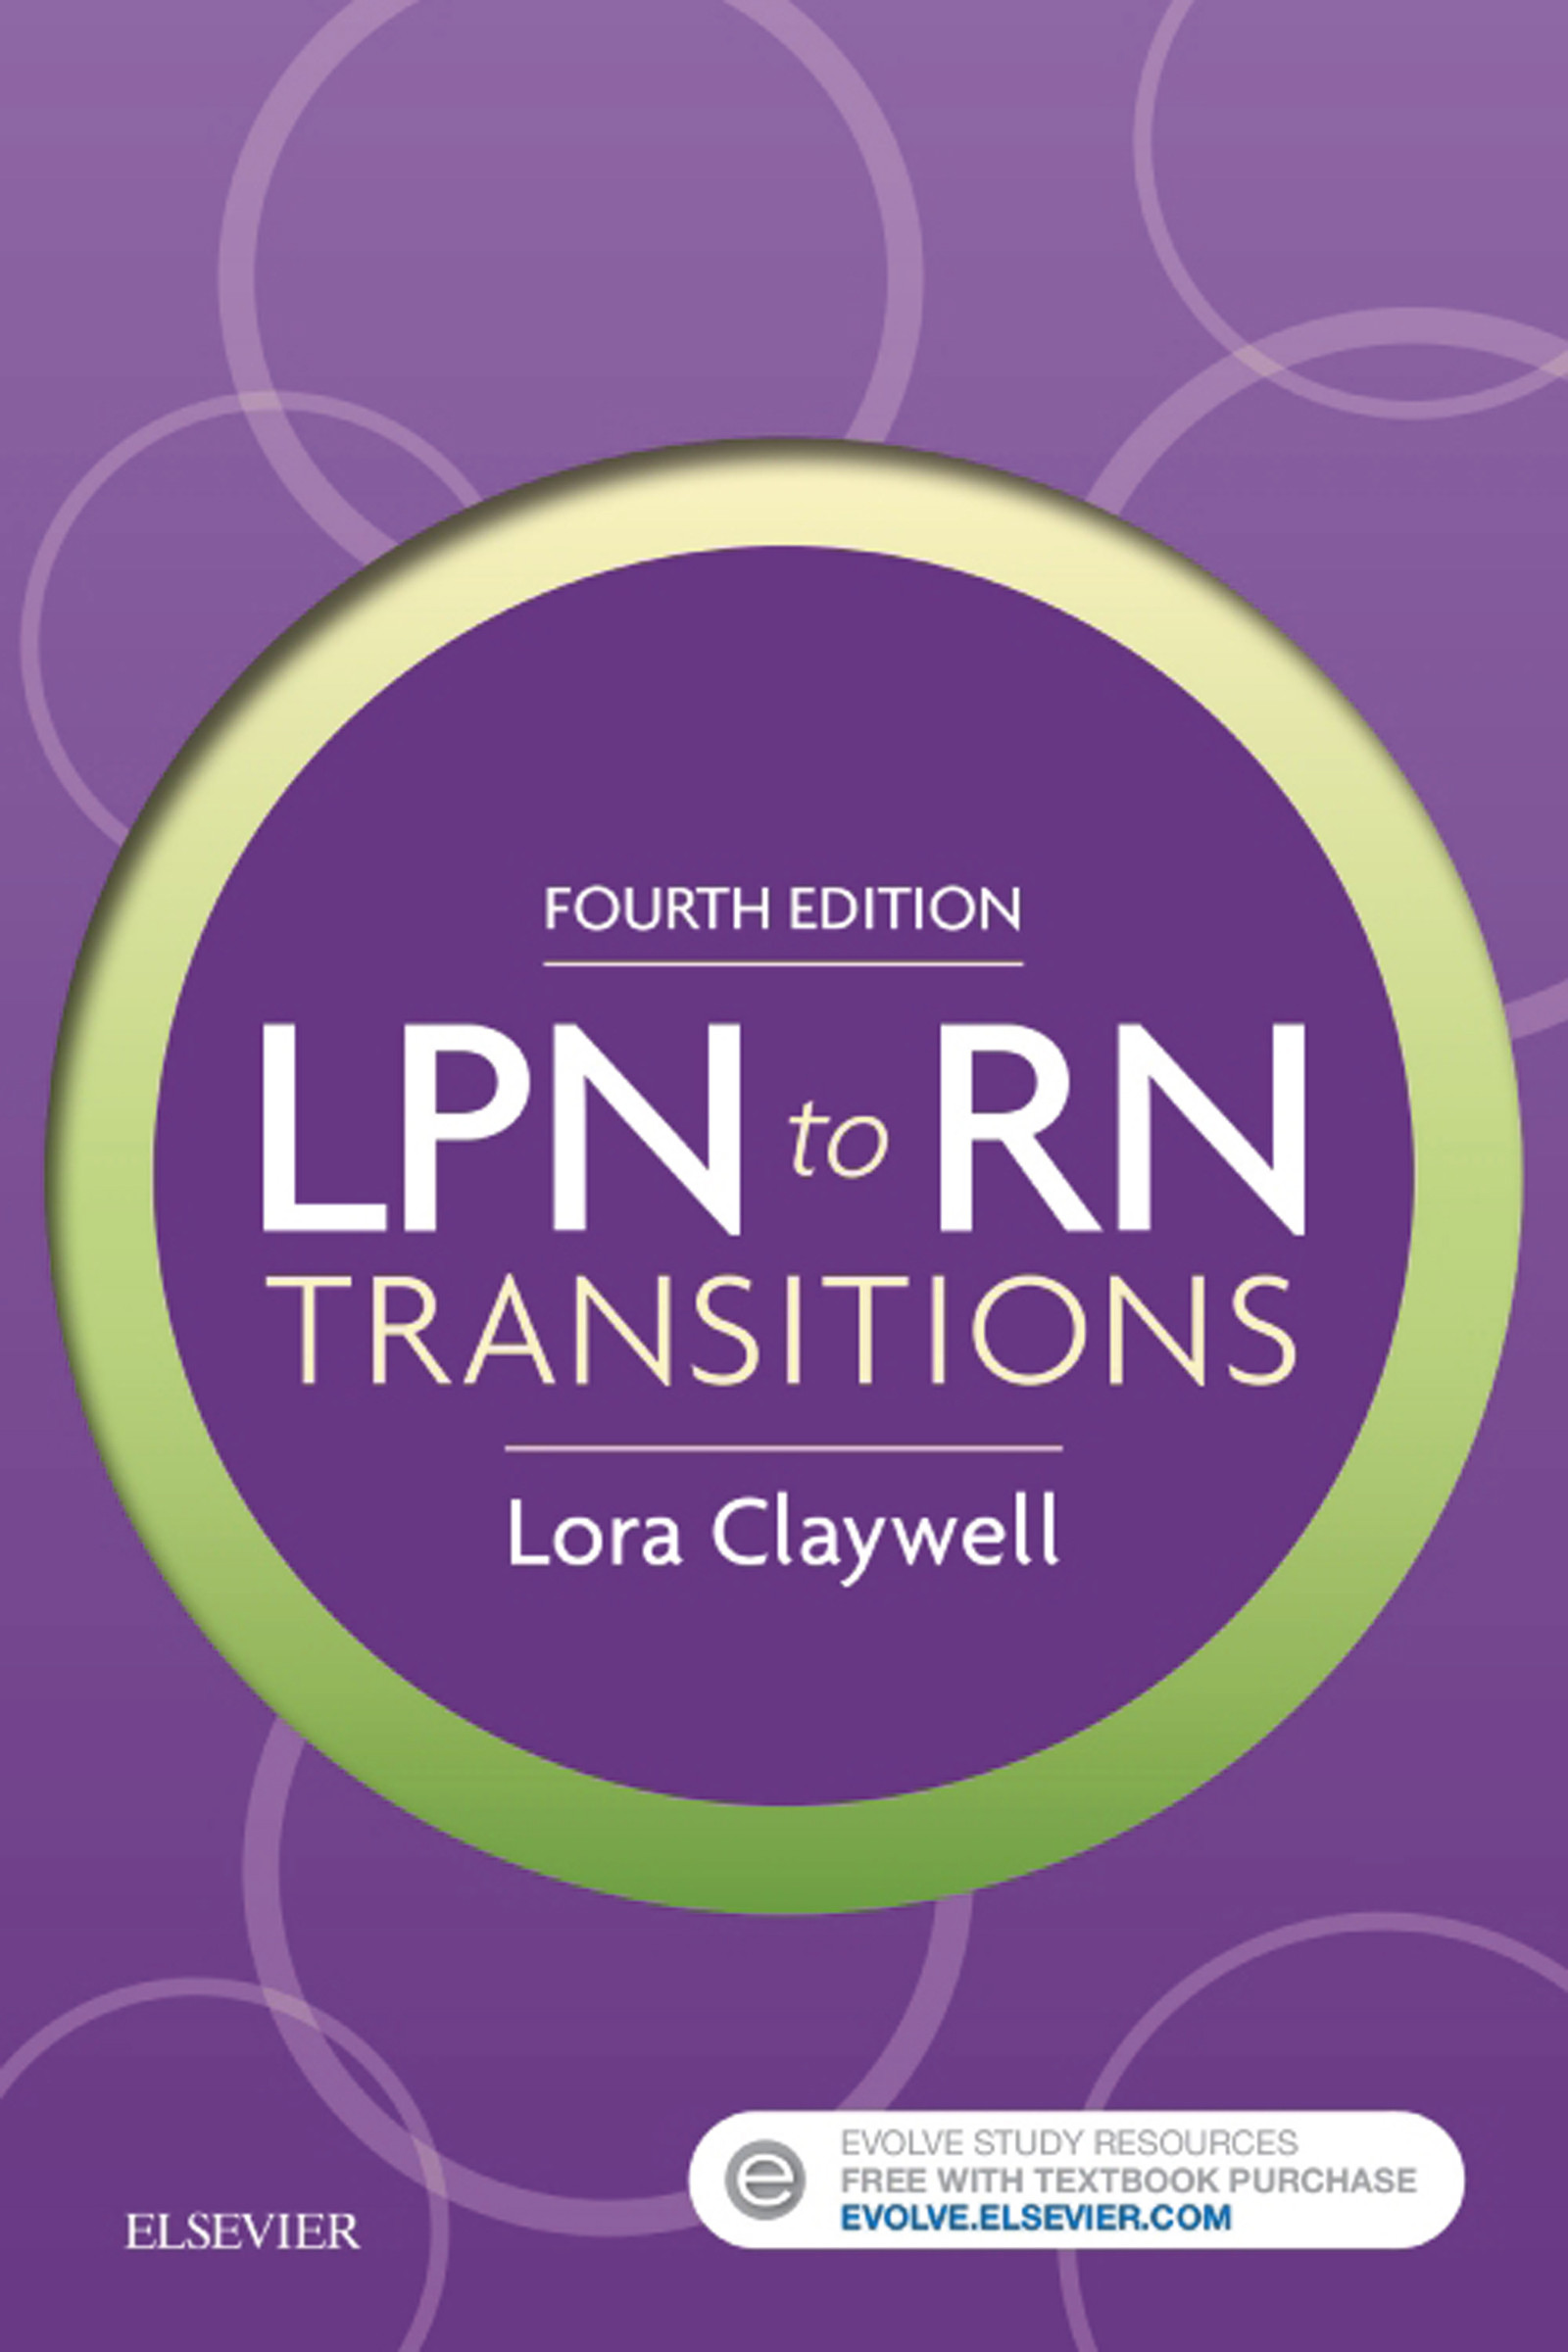 LPN to RN Transitions - E-Book